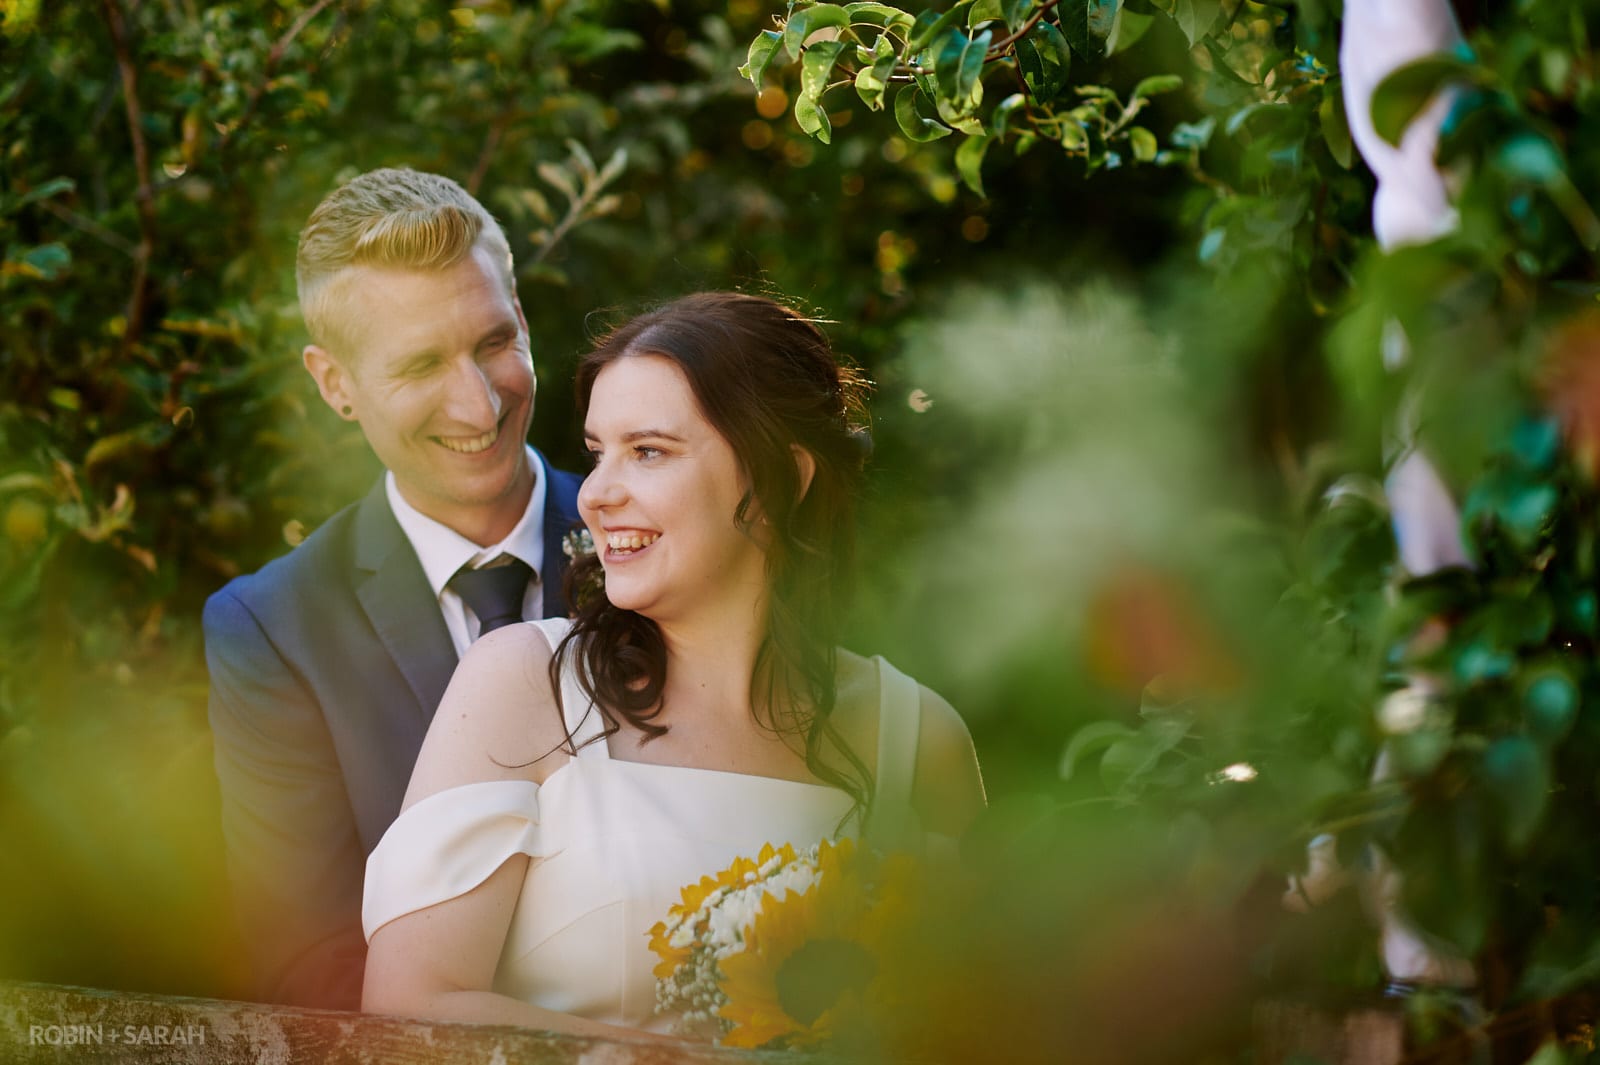 Bride and groom surrounded by trees in gardens at home